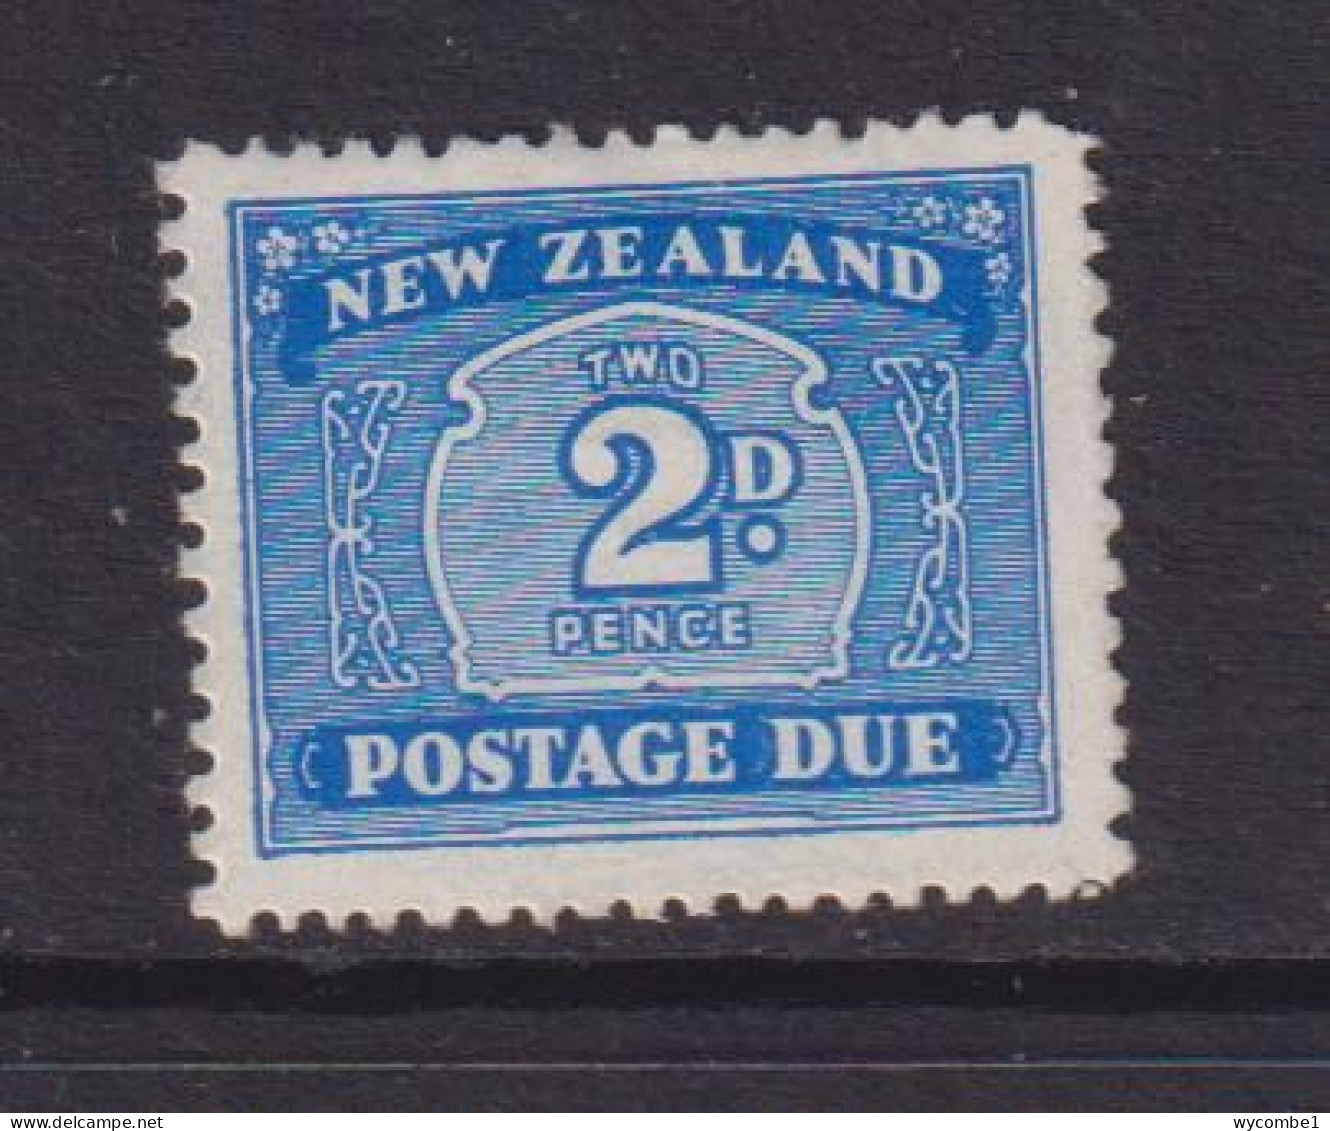 NEW ZEALAND  - 1939 Postage Due 2d Hinged Mint - Postage Due